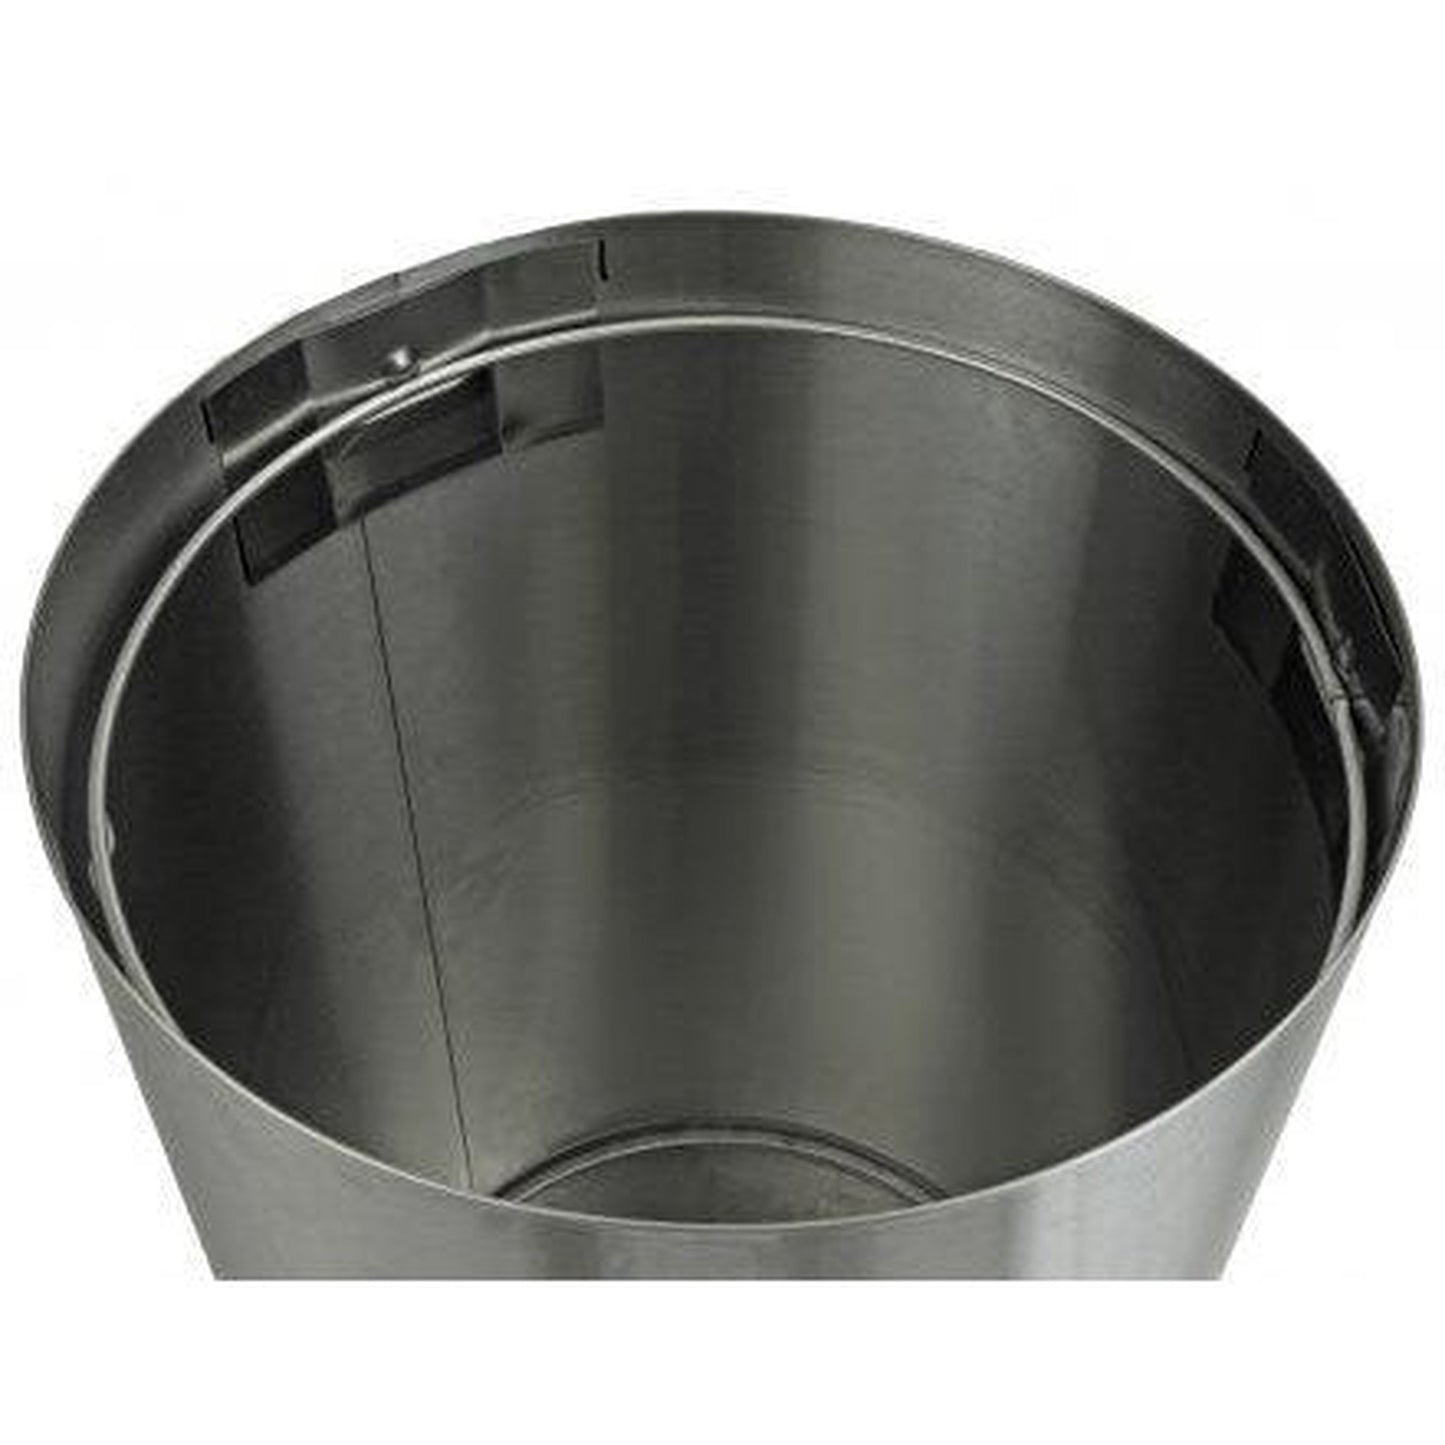 Frost 18.5 x 18.5 x 29.4 Stainless Steel Satin Waste Receptacles